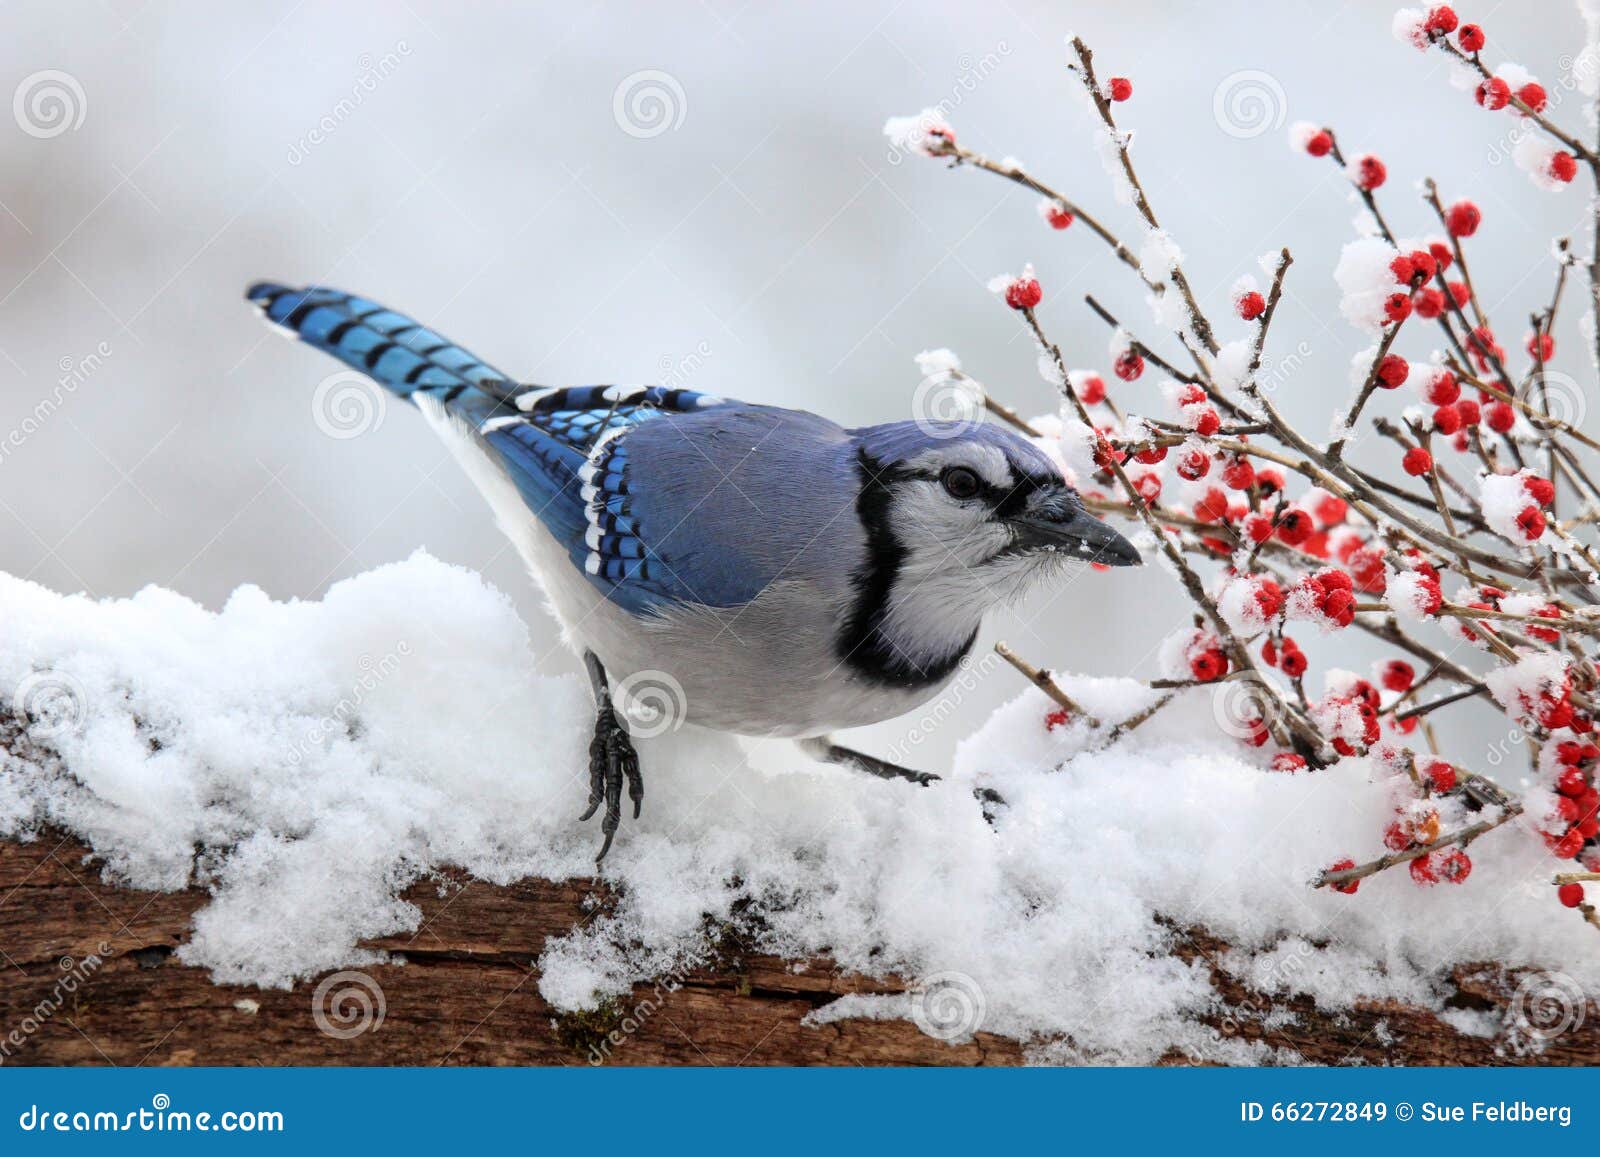 jay with winter berries